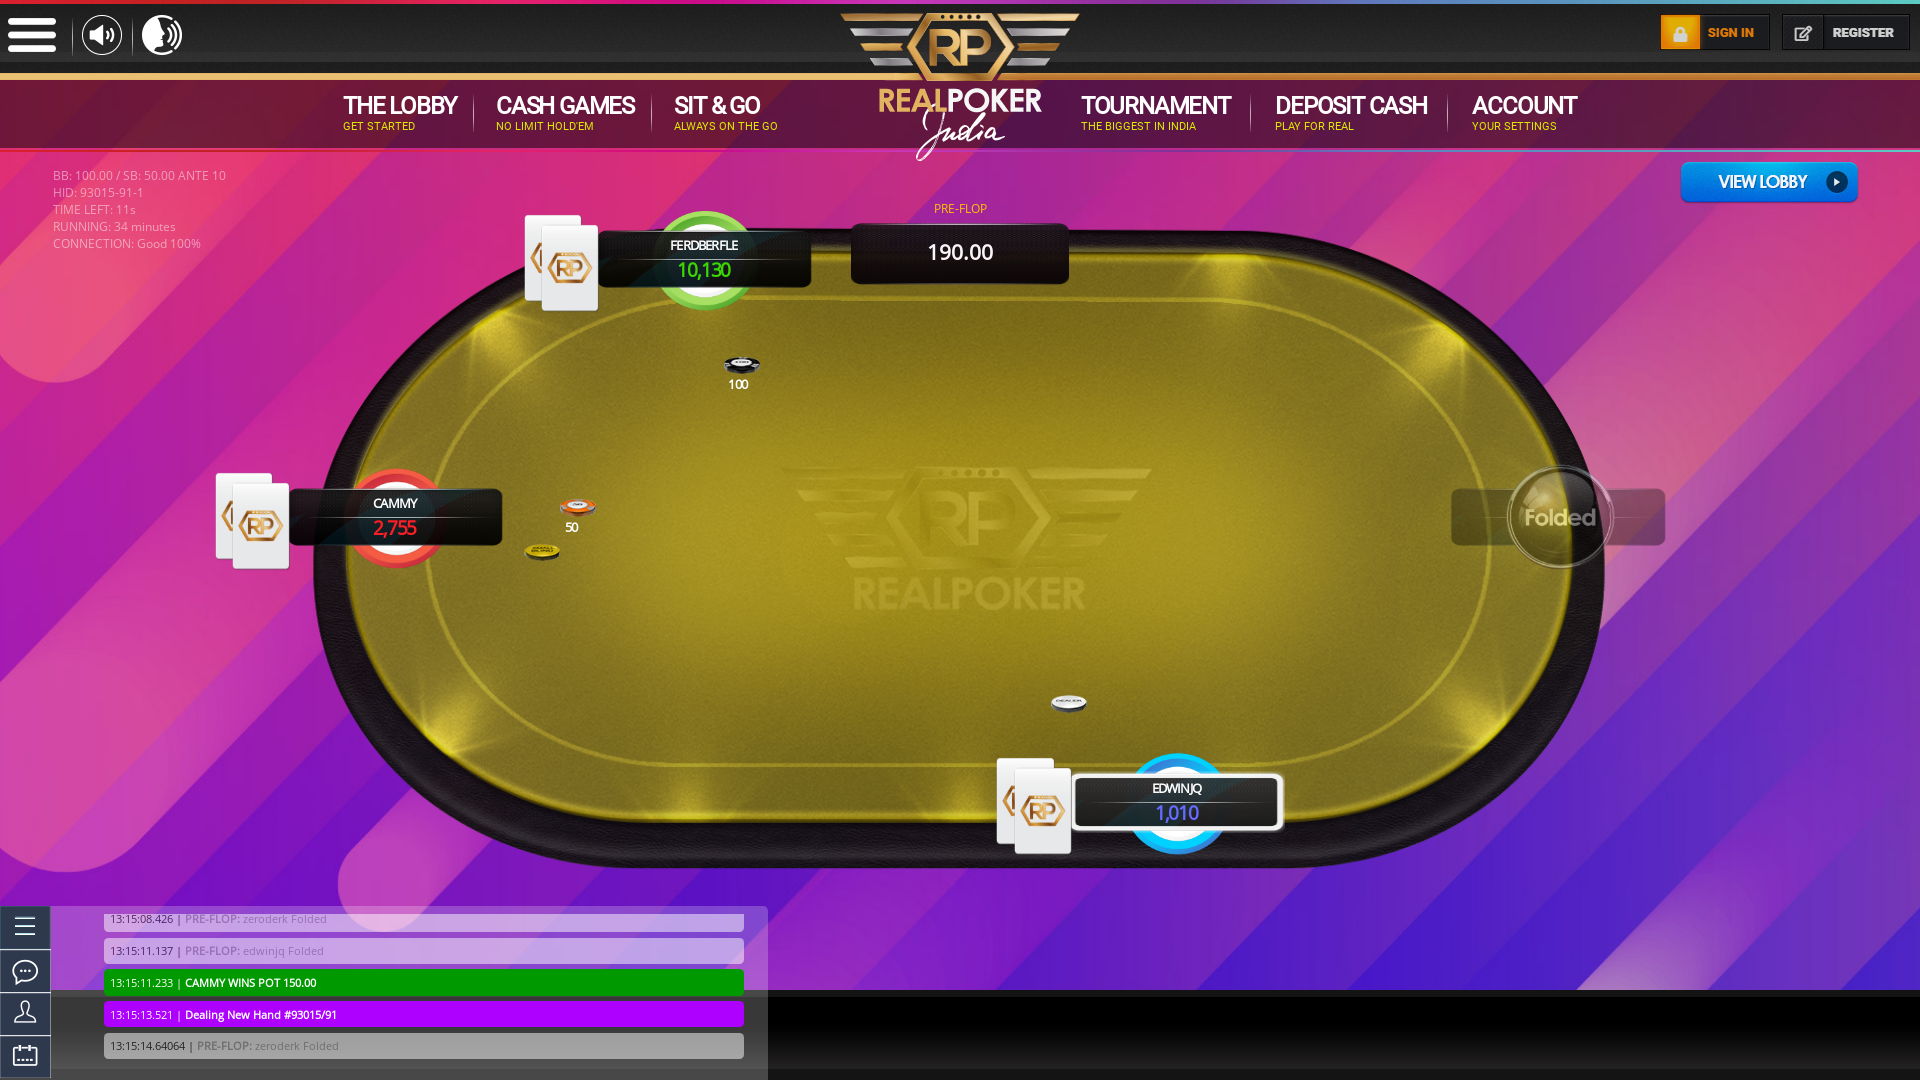 Real poker 10 player table in the 33rd minute of the match